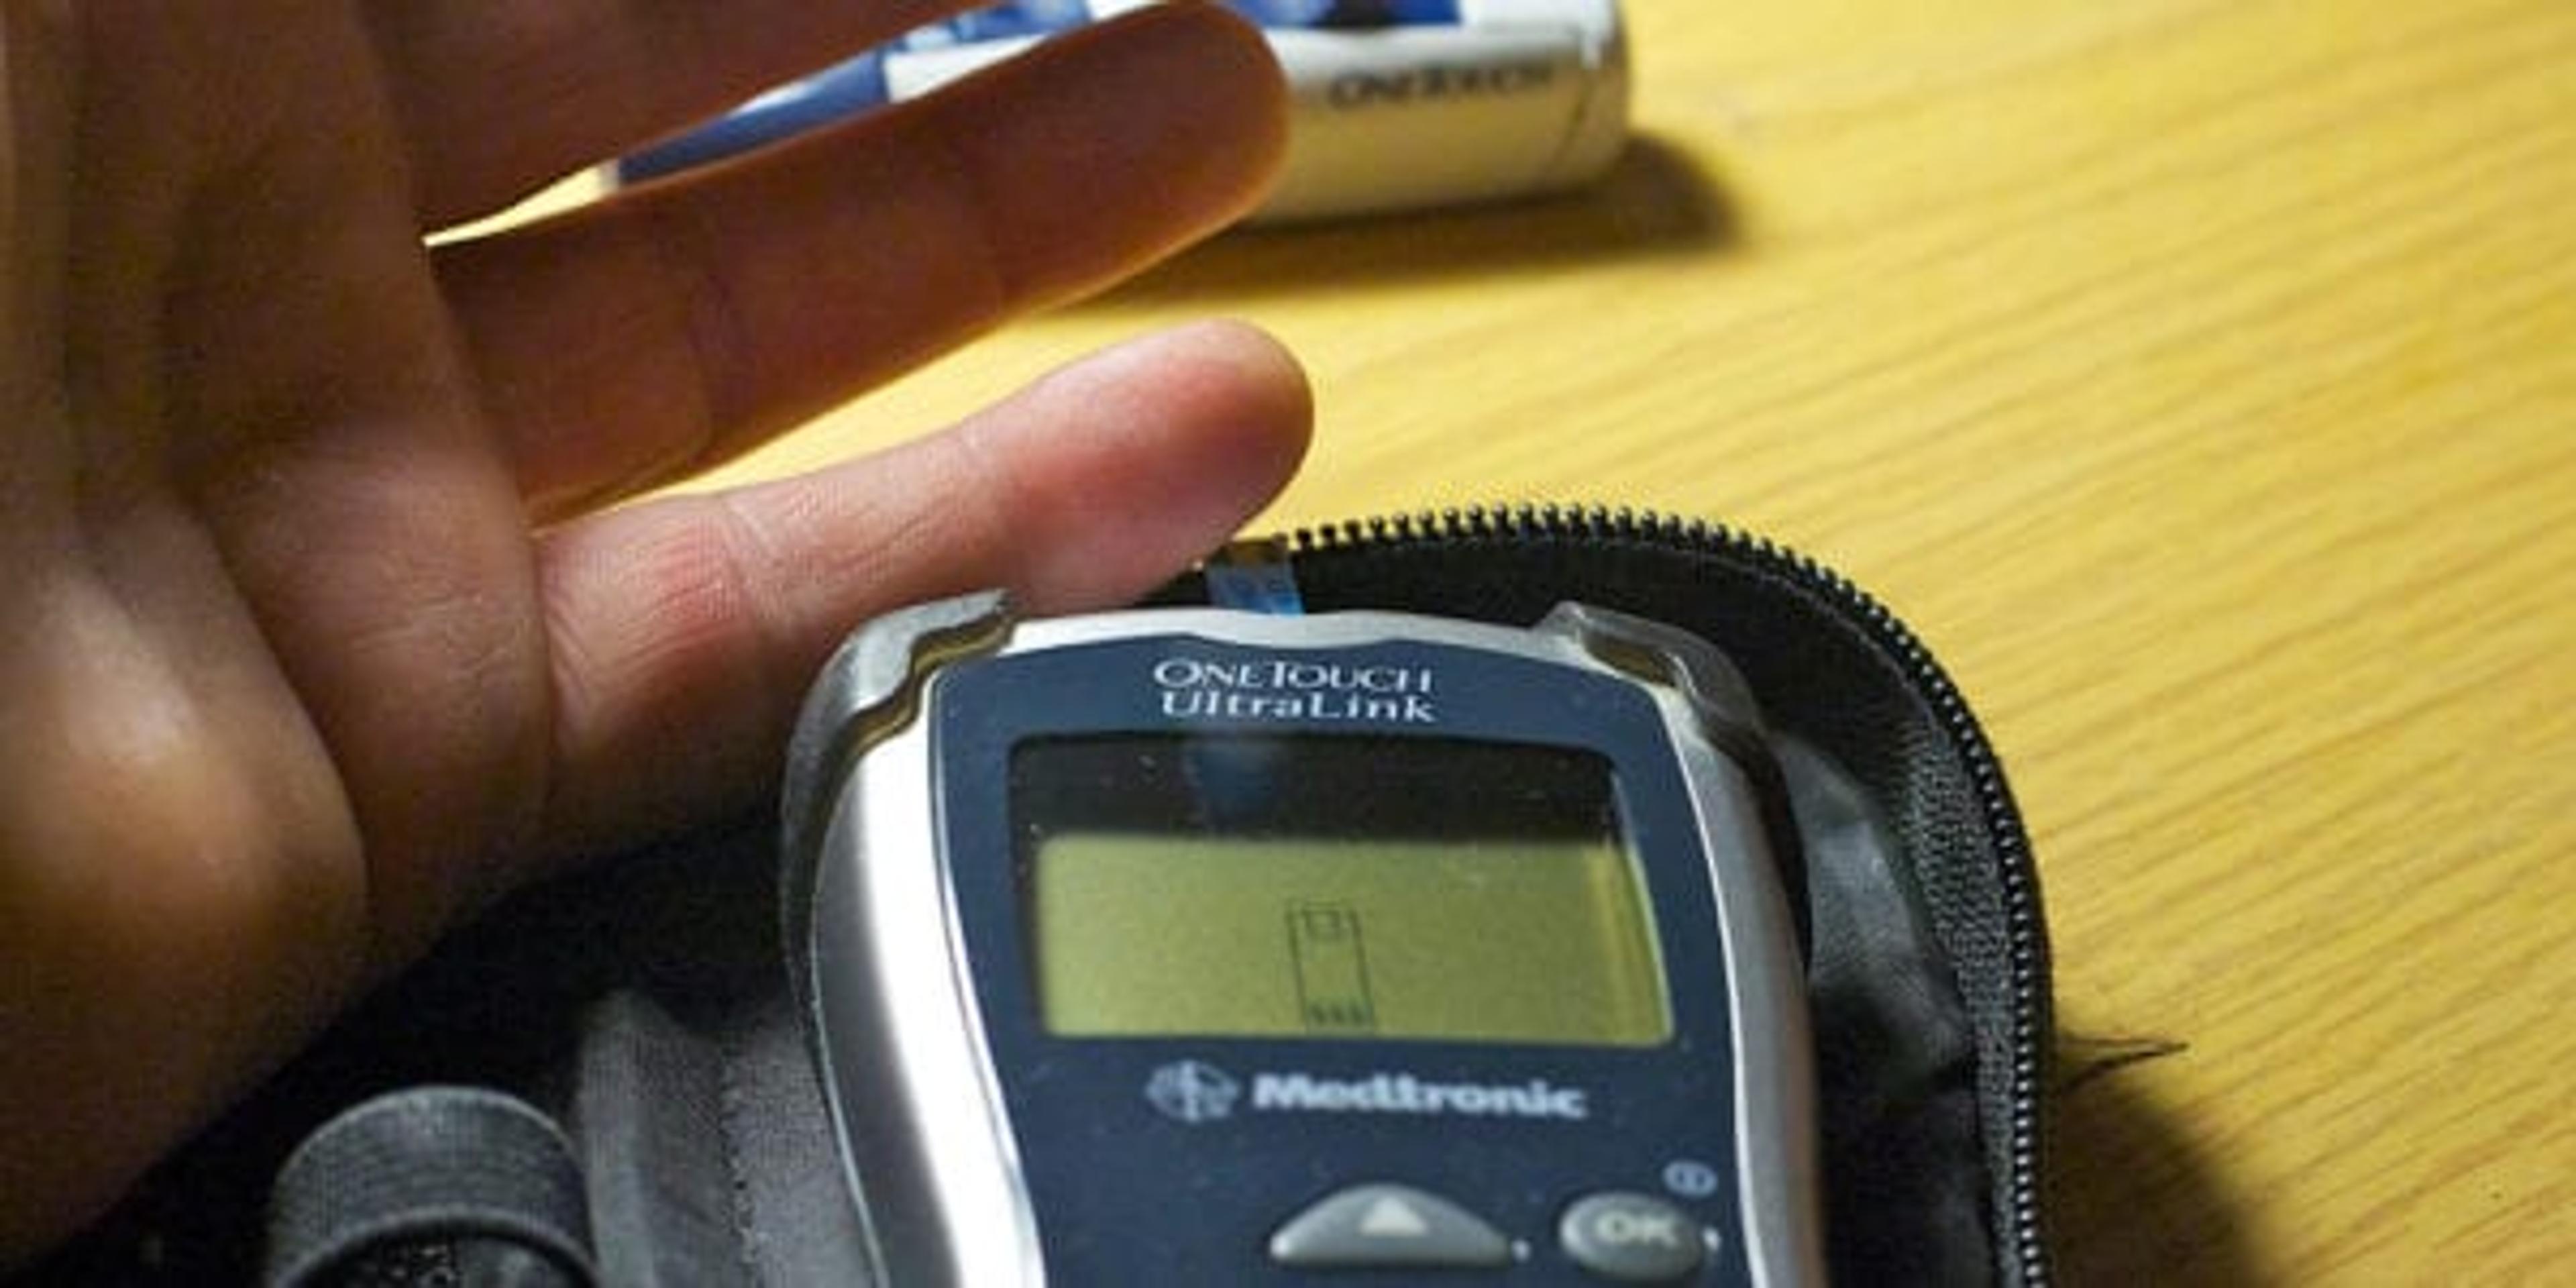 at risk for type 2 diabetes